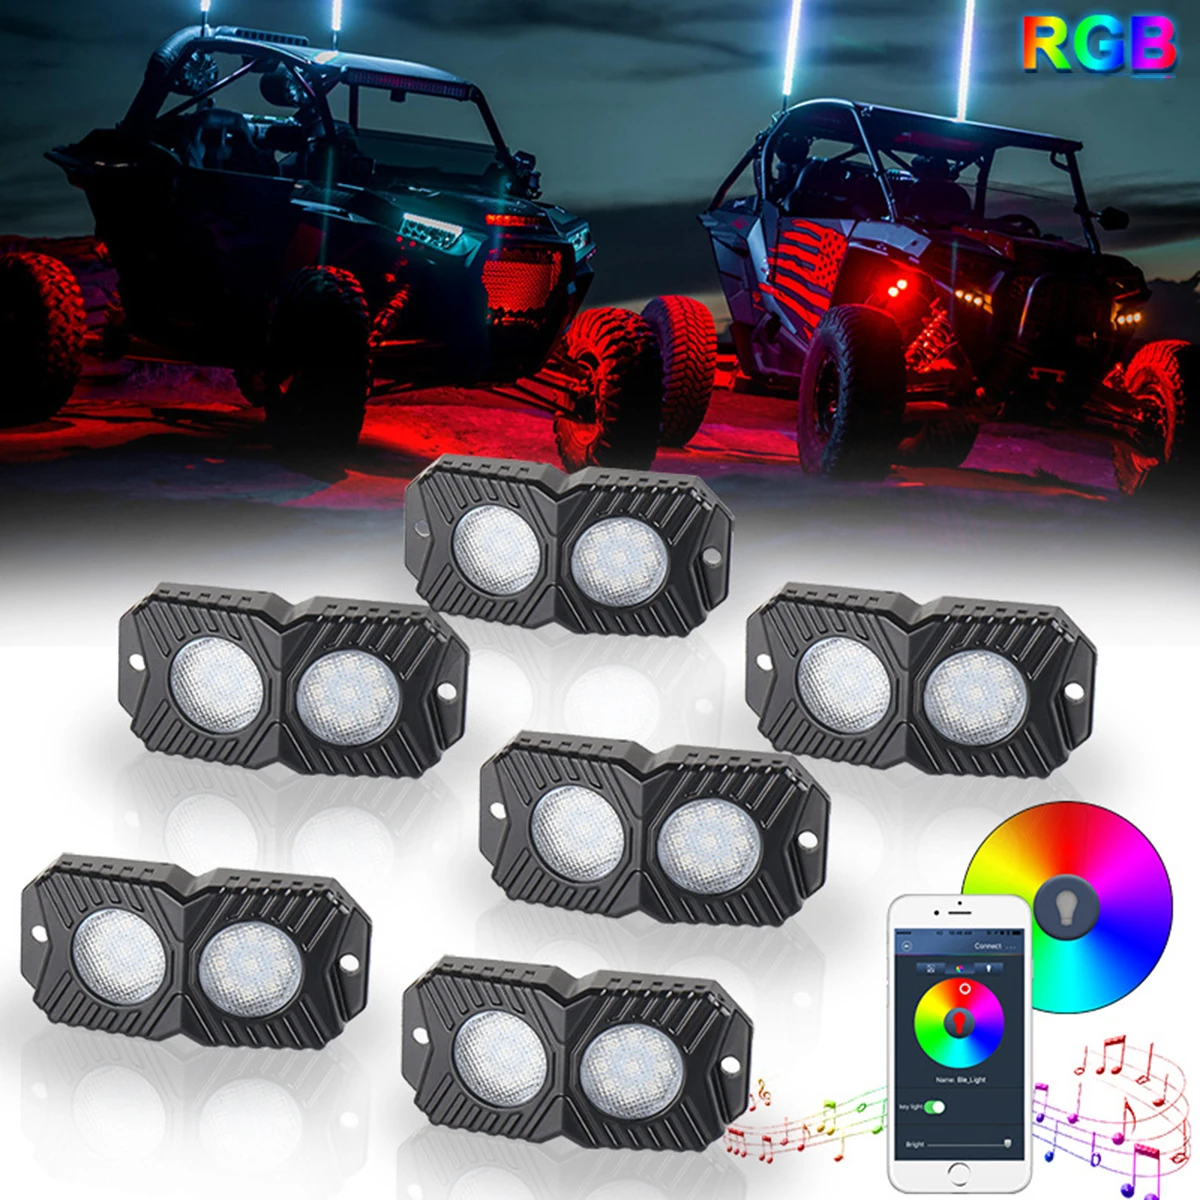 

4/6/8 Double Pods RGB Chassis Light Yacht Deck Atmosphere Light Led Rock Lights For Boat Jeep Off Road 4x4 Truck Underbody Lamp